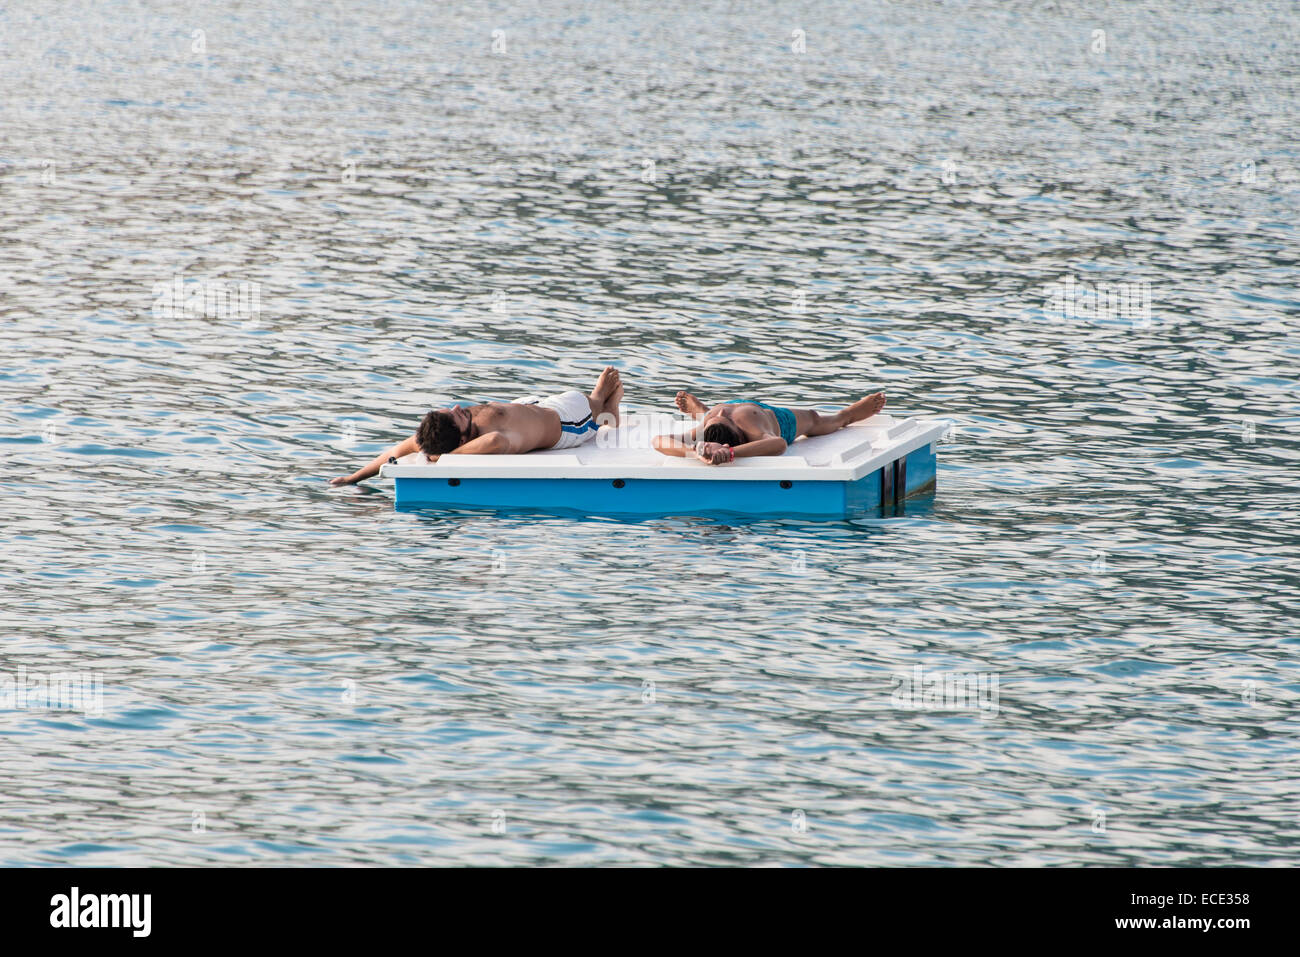 Two men lying on a floating platform in the sea, Italy Stock Photo